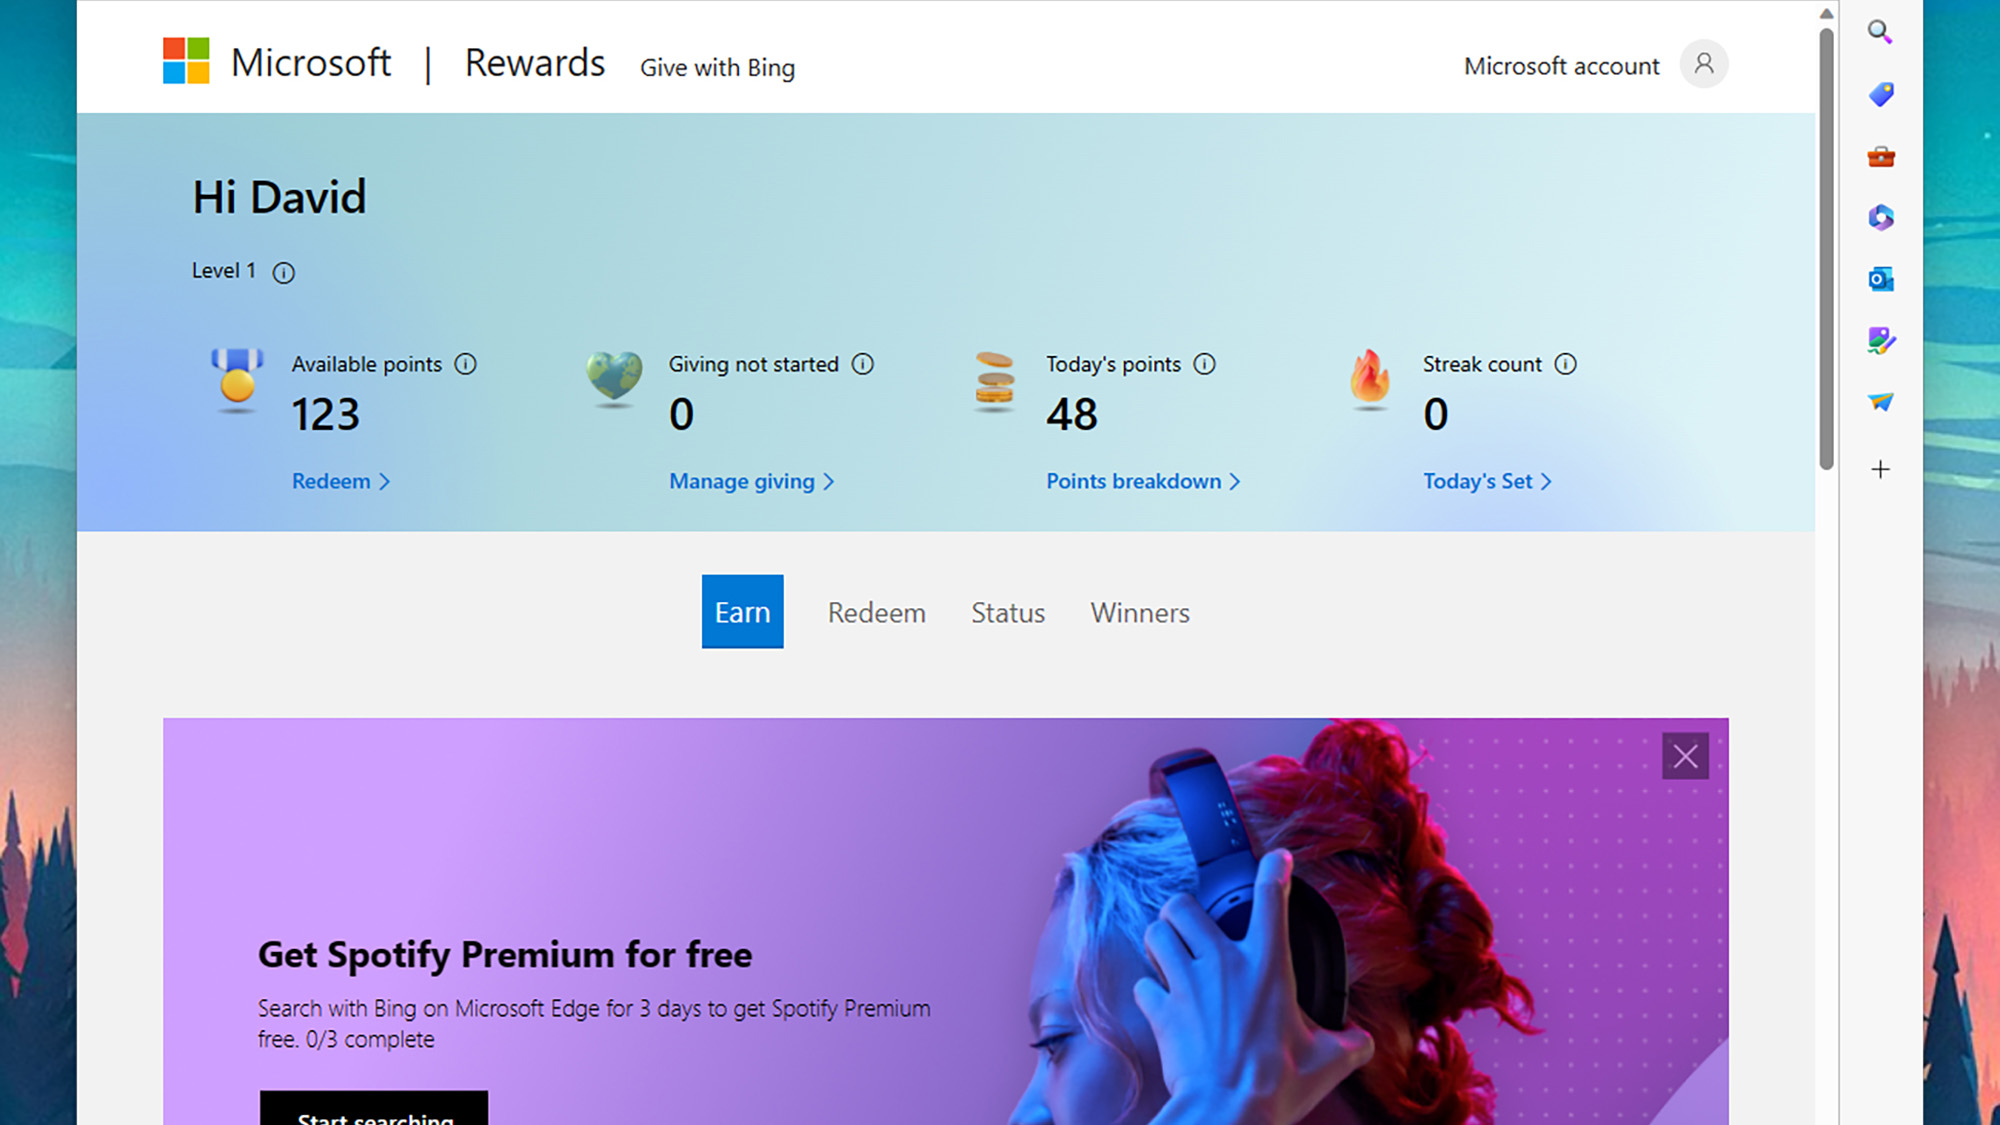 How to get the maximum points per day on Microsoft Rewards